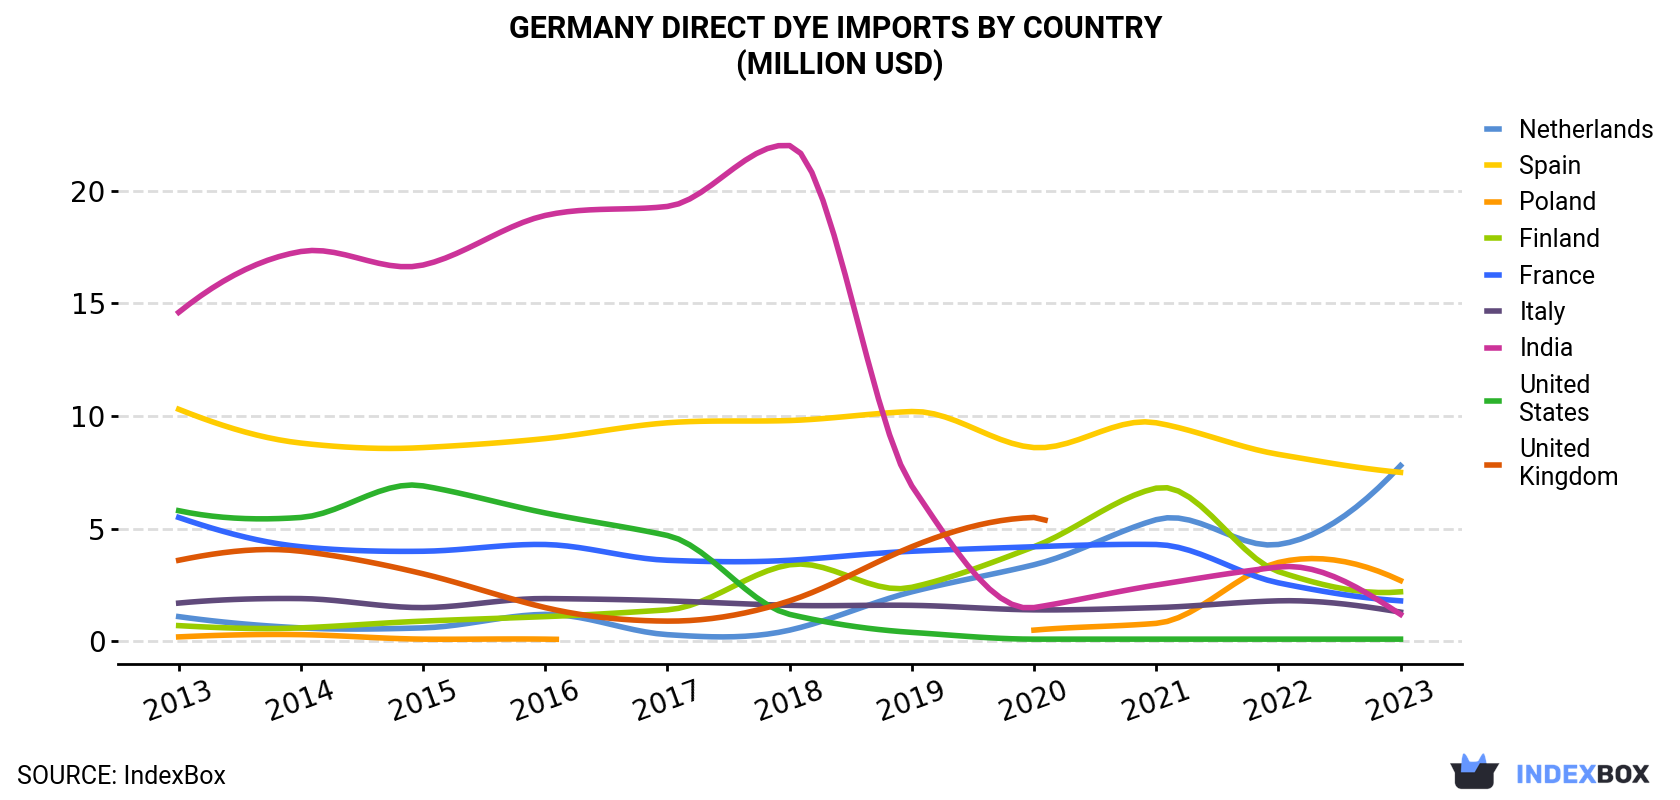 Germany Direct Dye Imports By Country (Million USD)